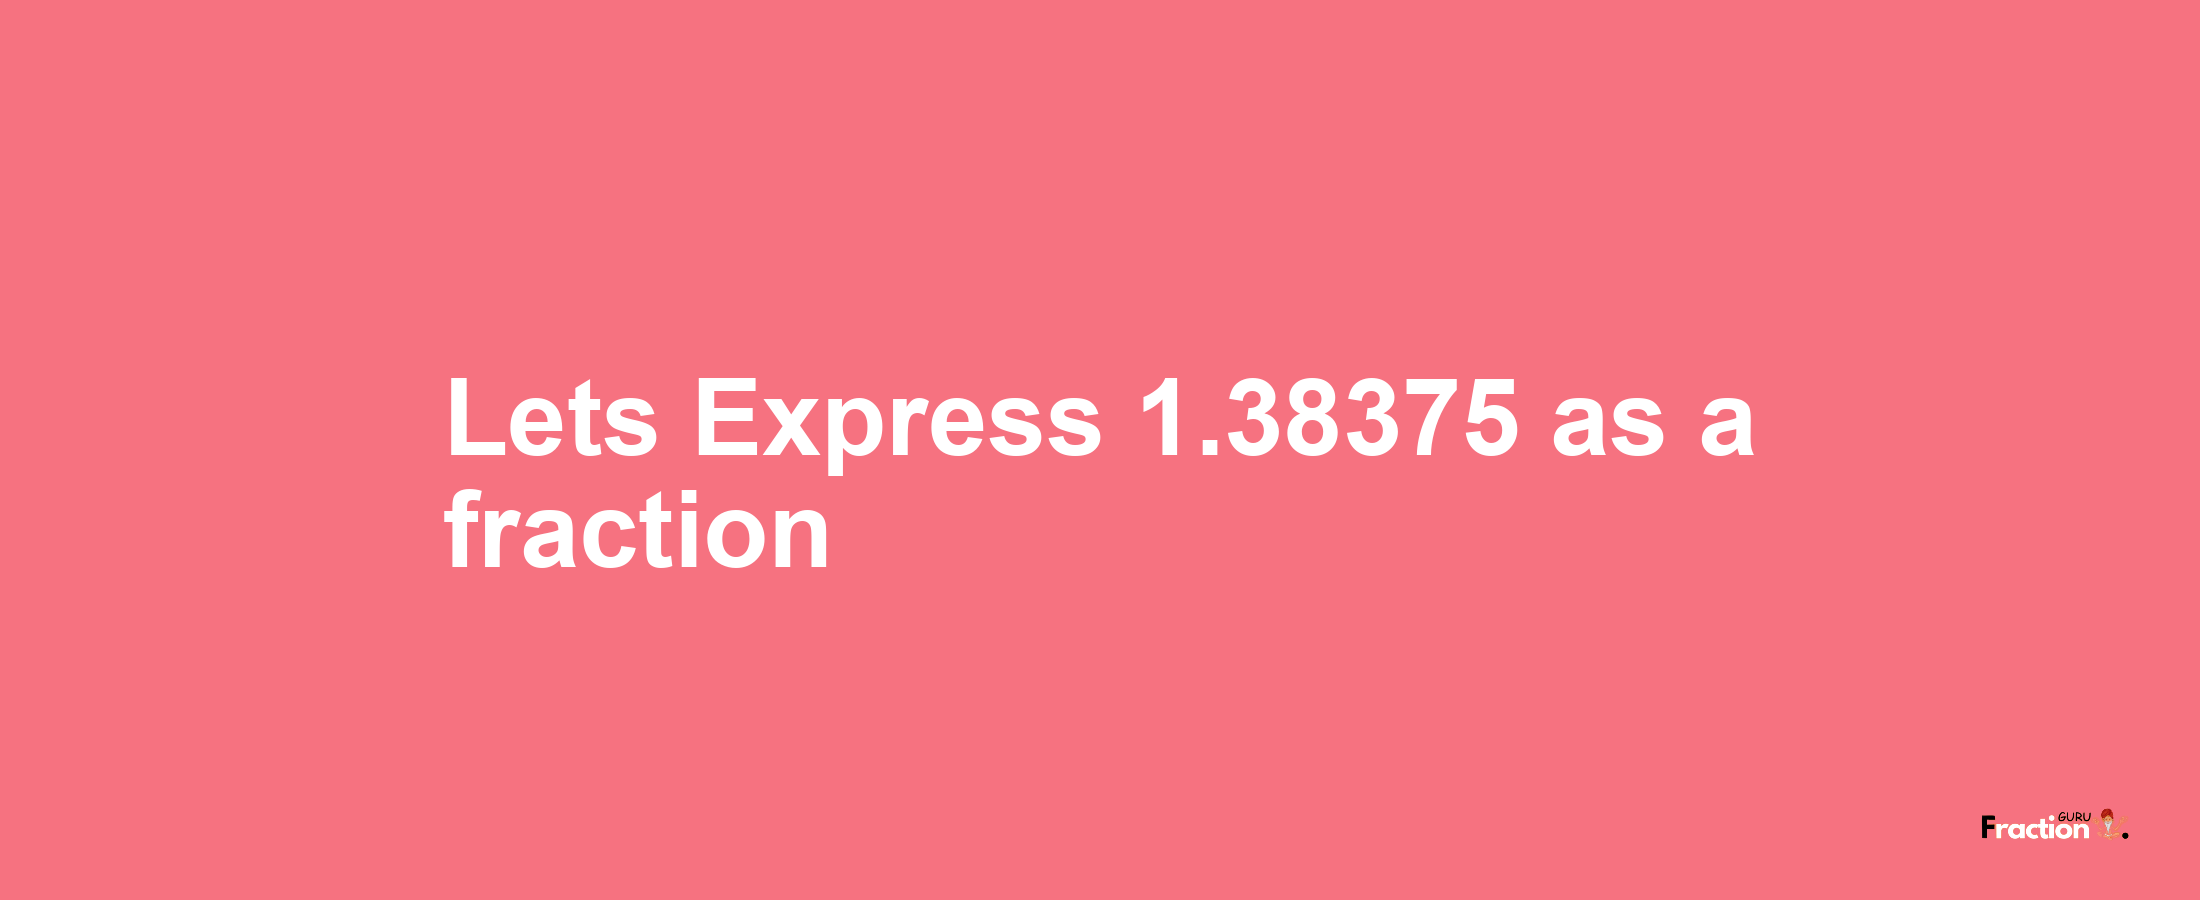 Lets Express 1.38375 as afraction